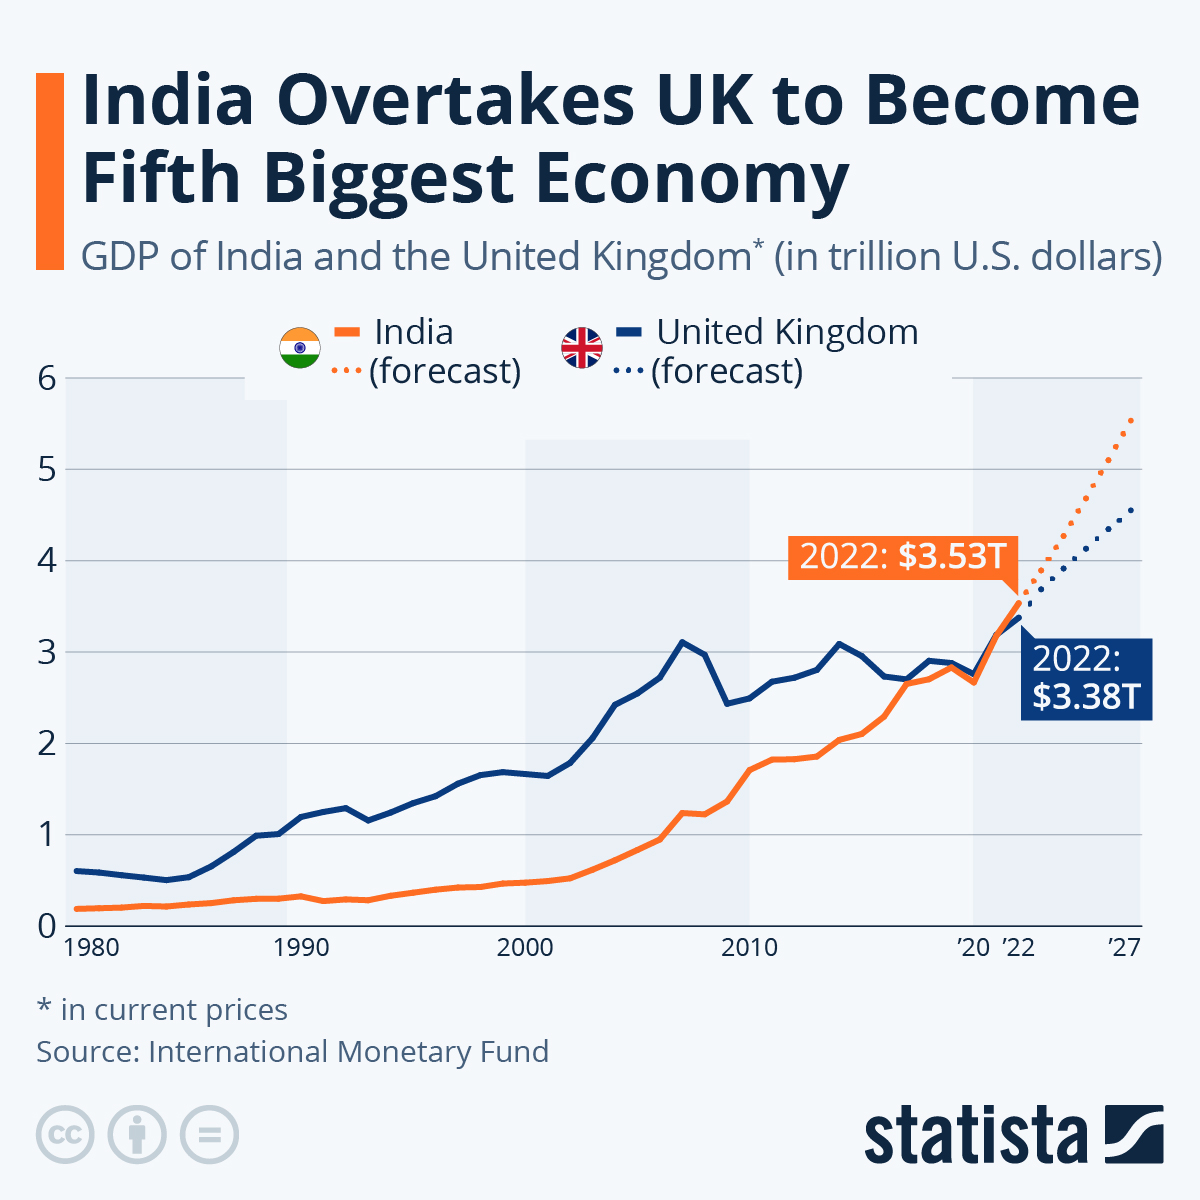 India Overtakes UK to Become Fifth Biggest Economy